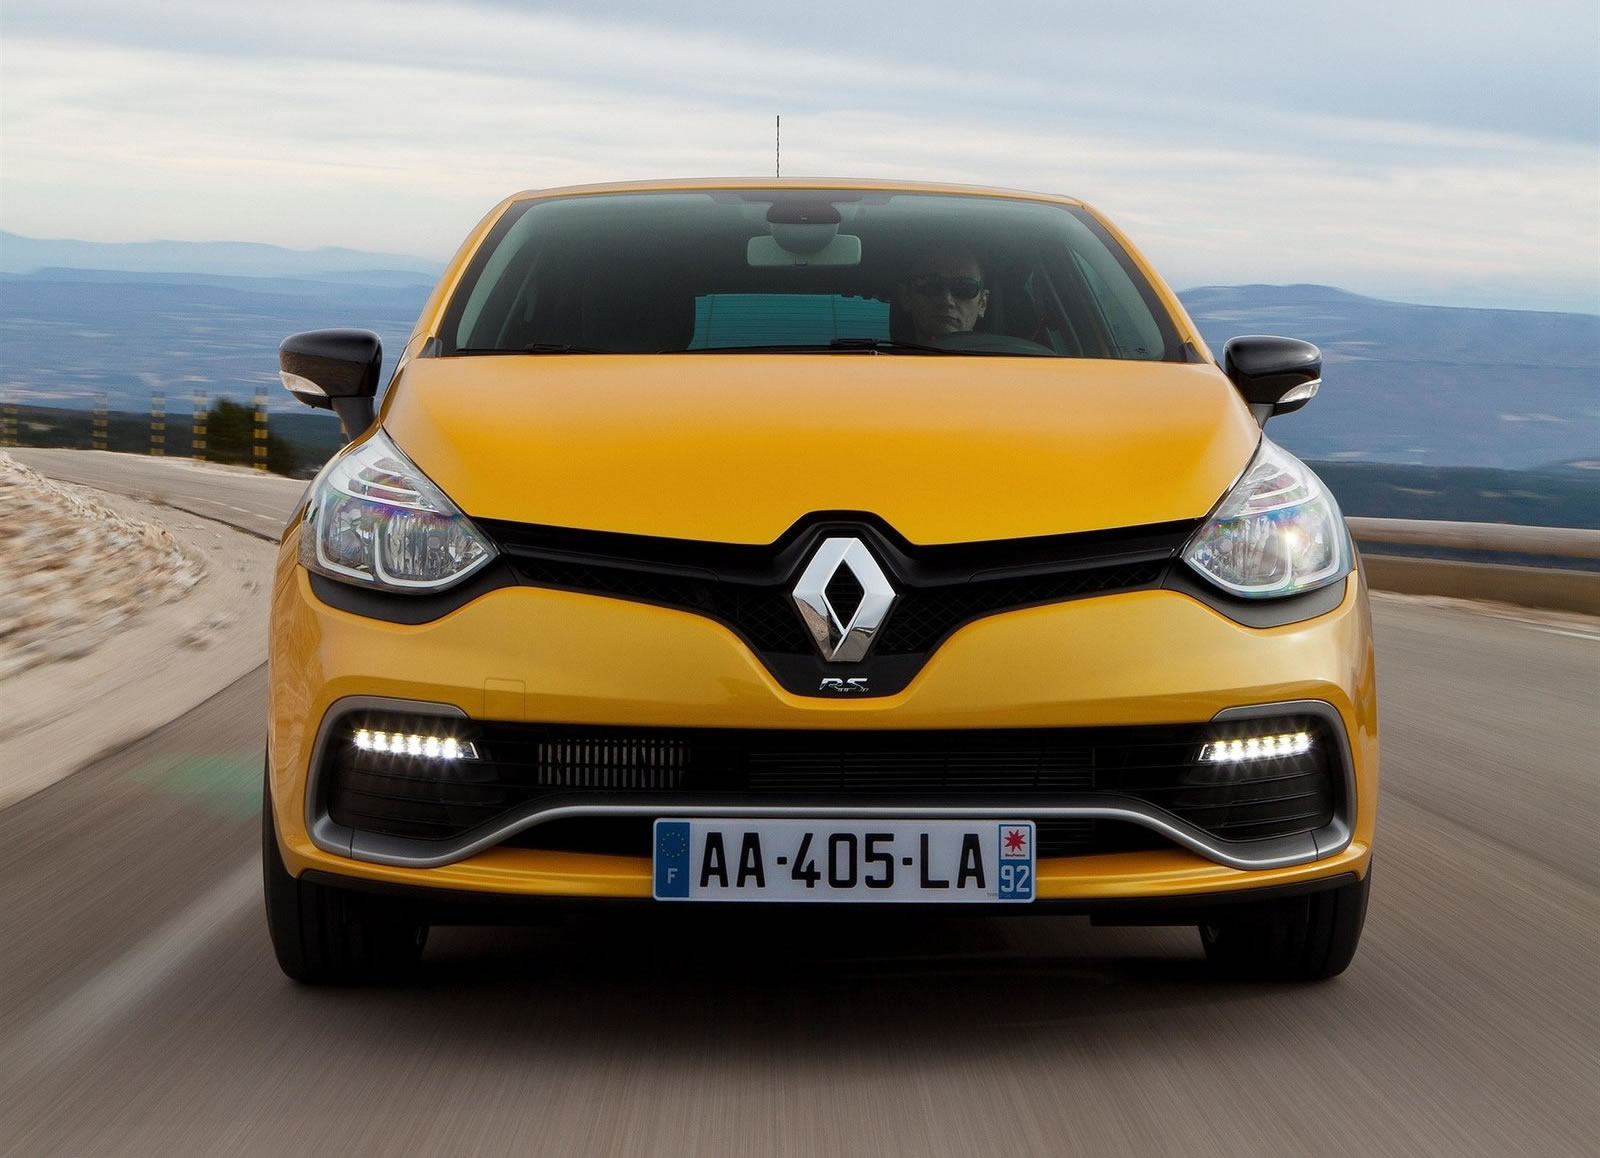 14-clio-rs-05-front.jpg